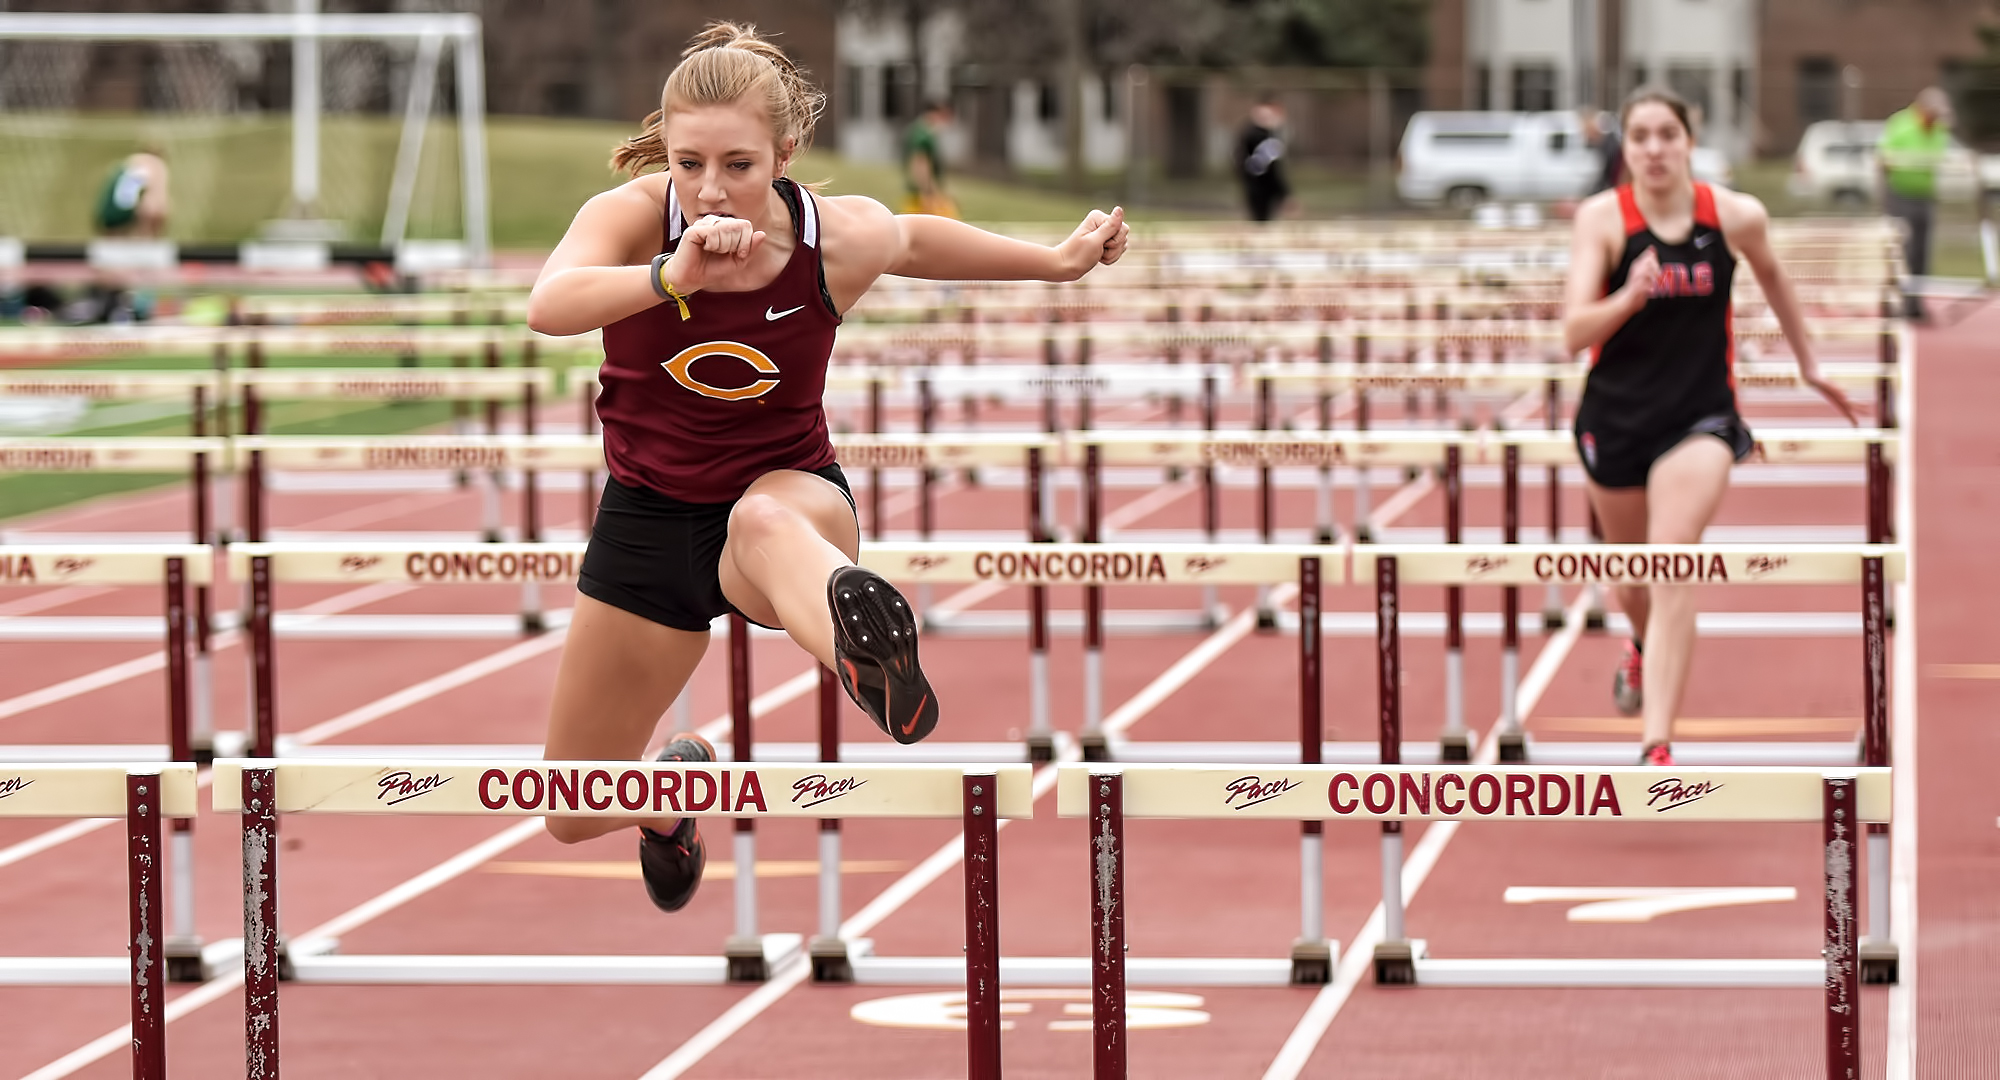 Senior Jenna Stilwell finishes strong in the 100-meter hurdles in the Cobber Twilight Meet. She recorded Top 10 finishes in both the hurdles and javelin.